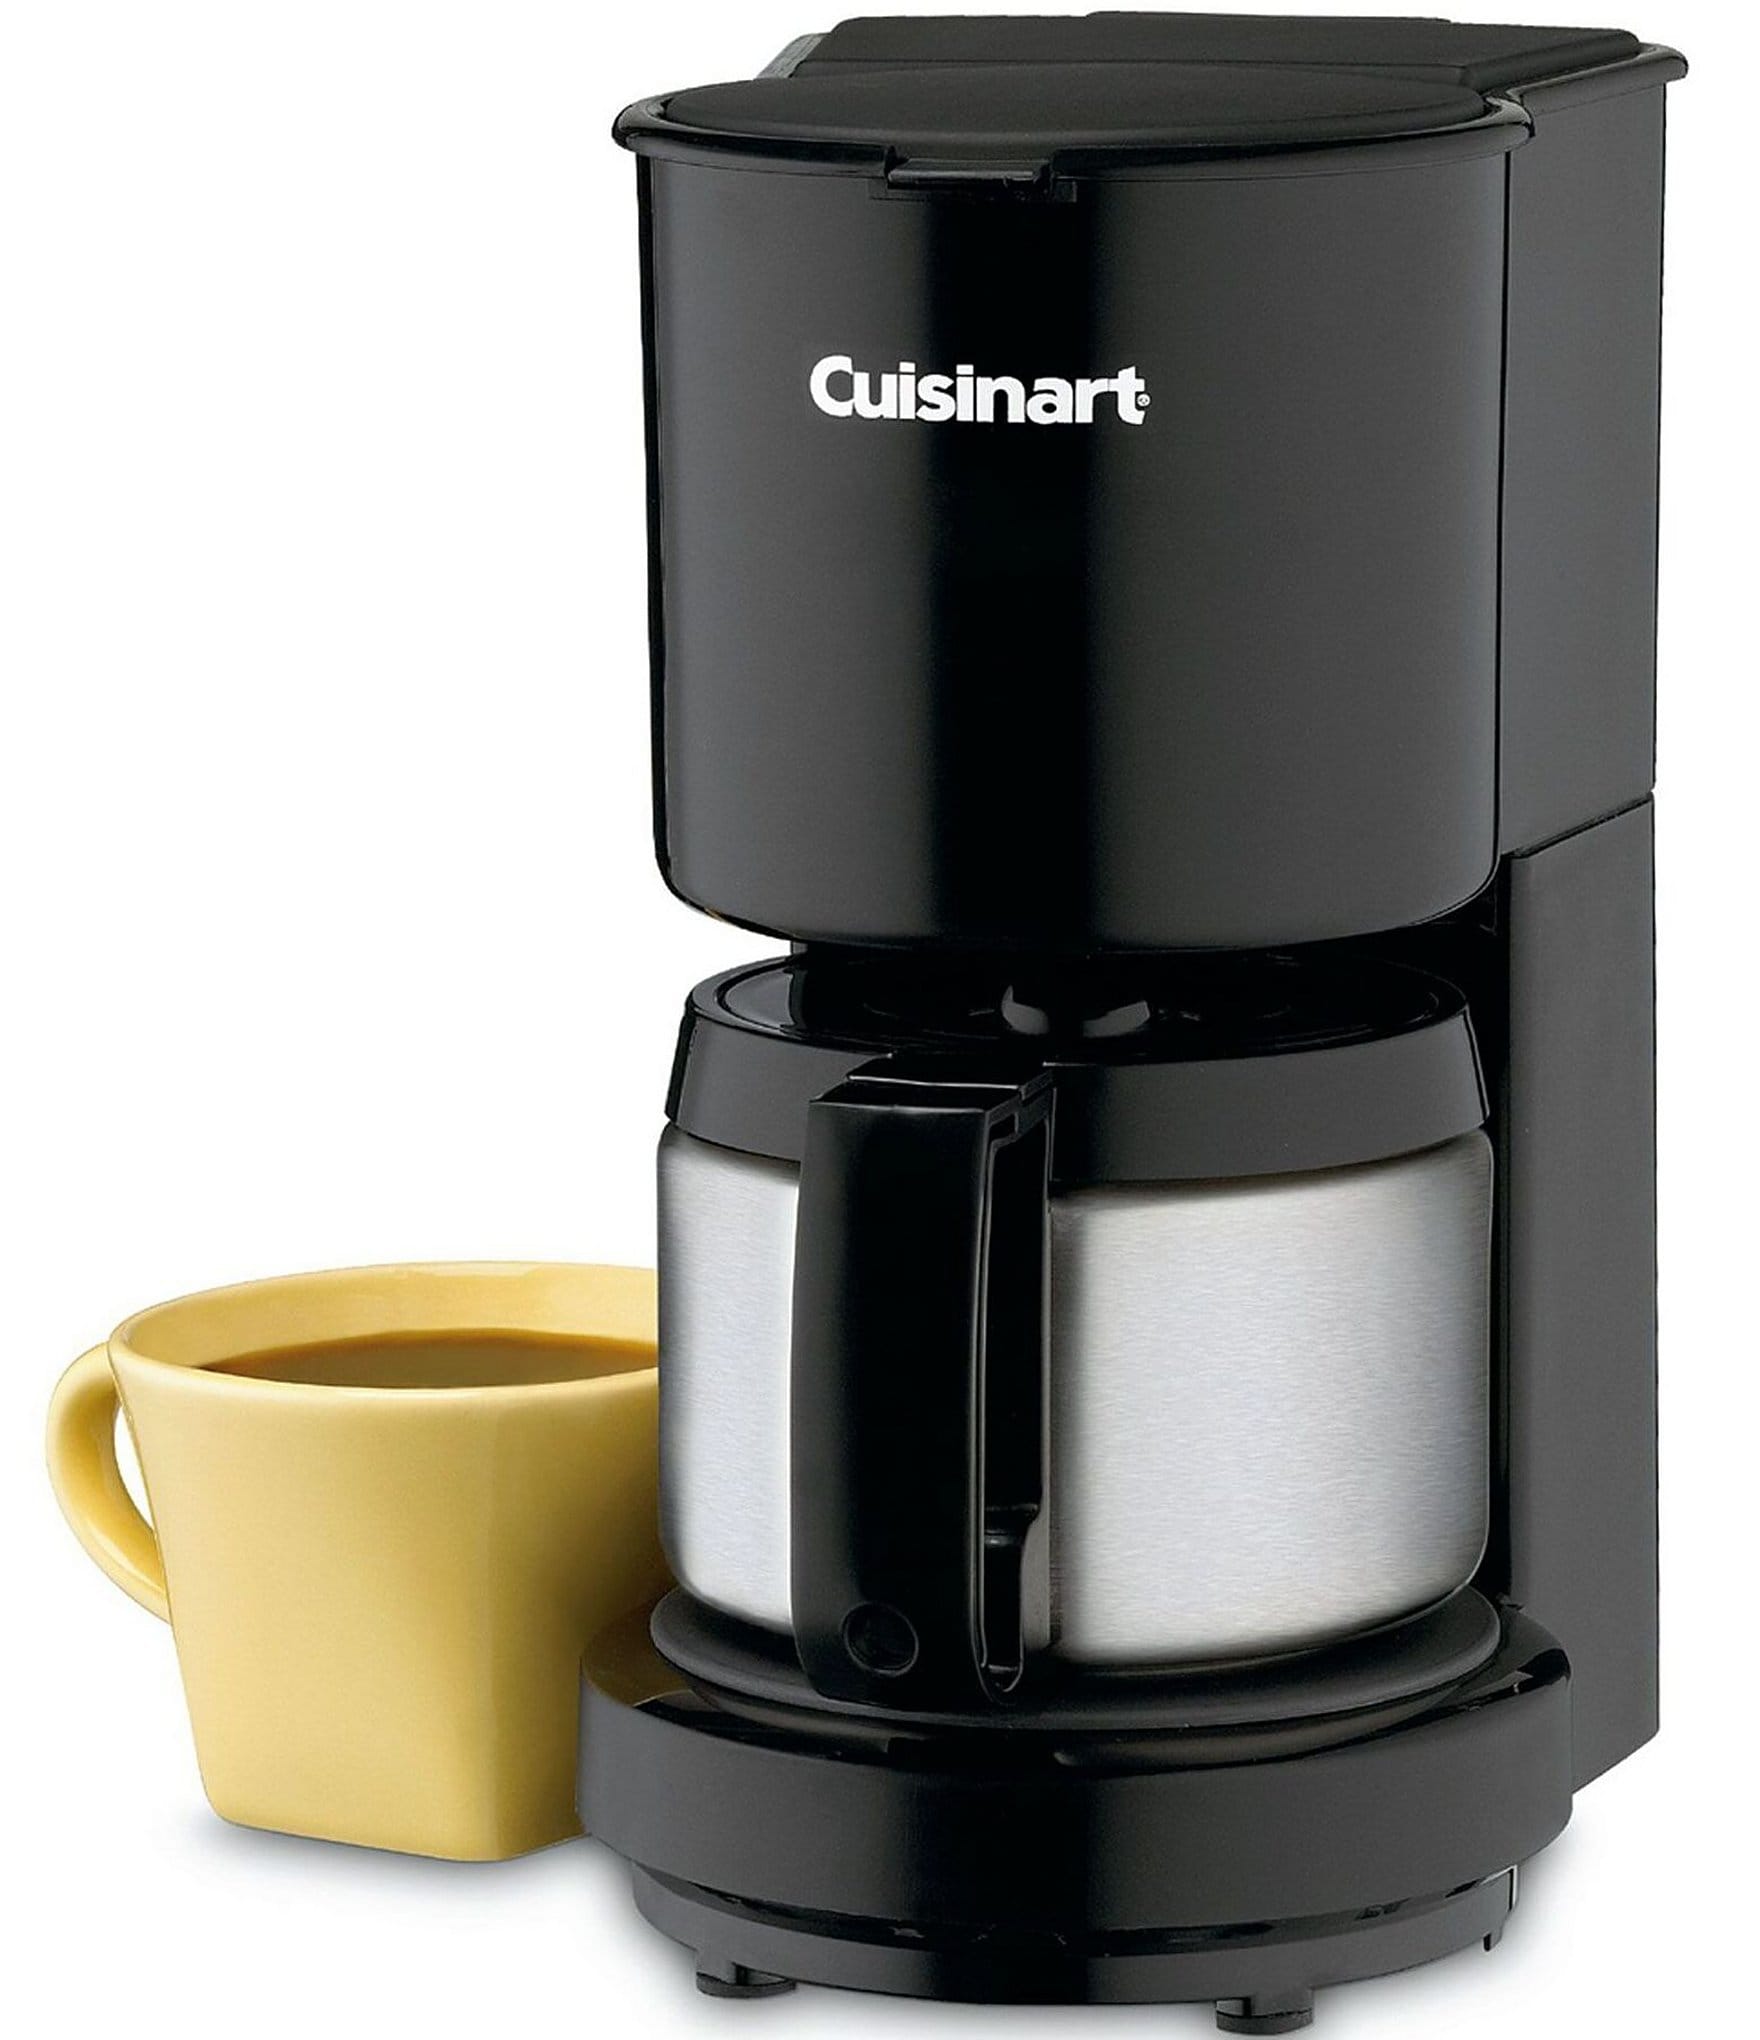  Cuisinart Stainless Steel Coffee Center Combo Coffee Maker  (Black) Bundle with Colombian Roast Single Serve KCup and Stainless Steel  Tumbler (3 Items): Home & Kitchen